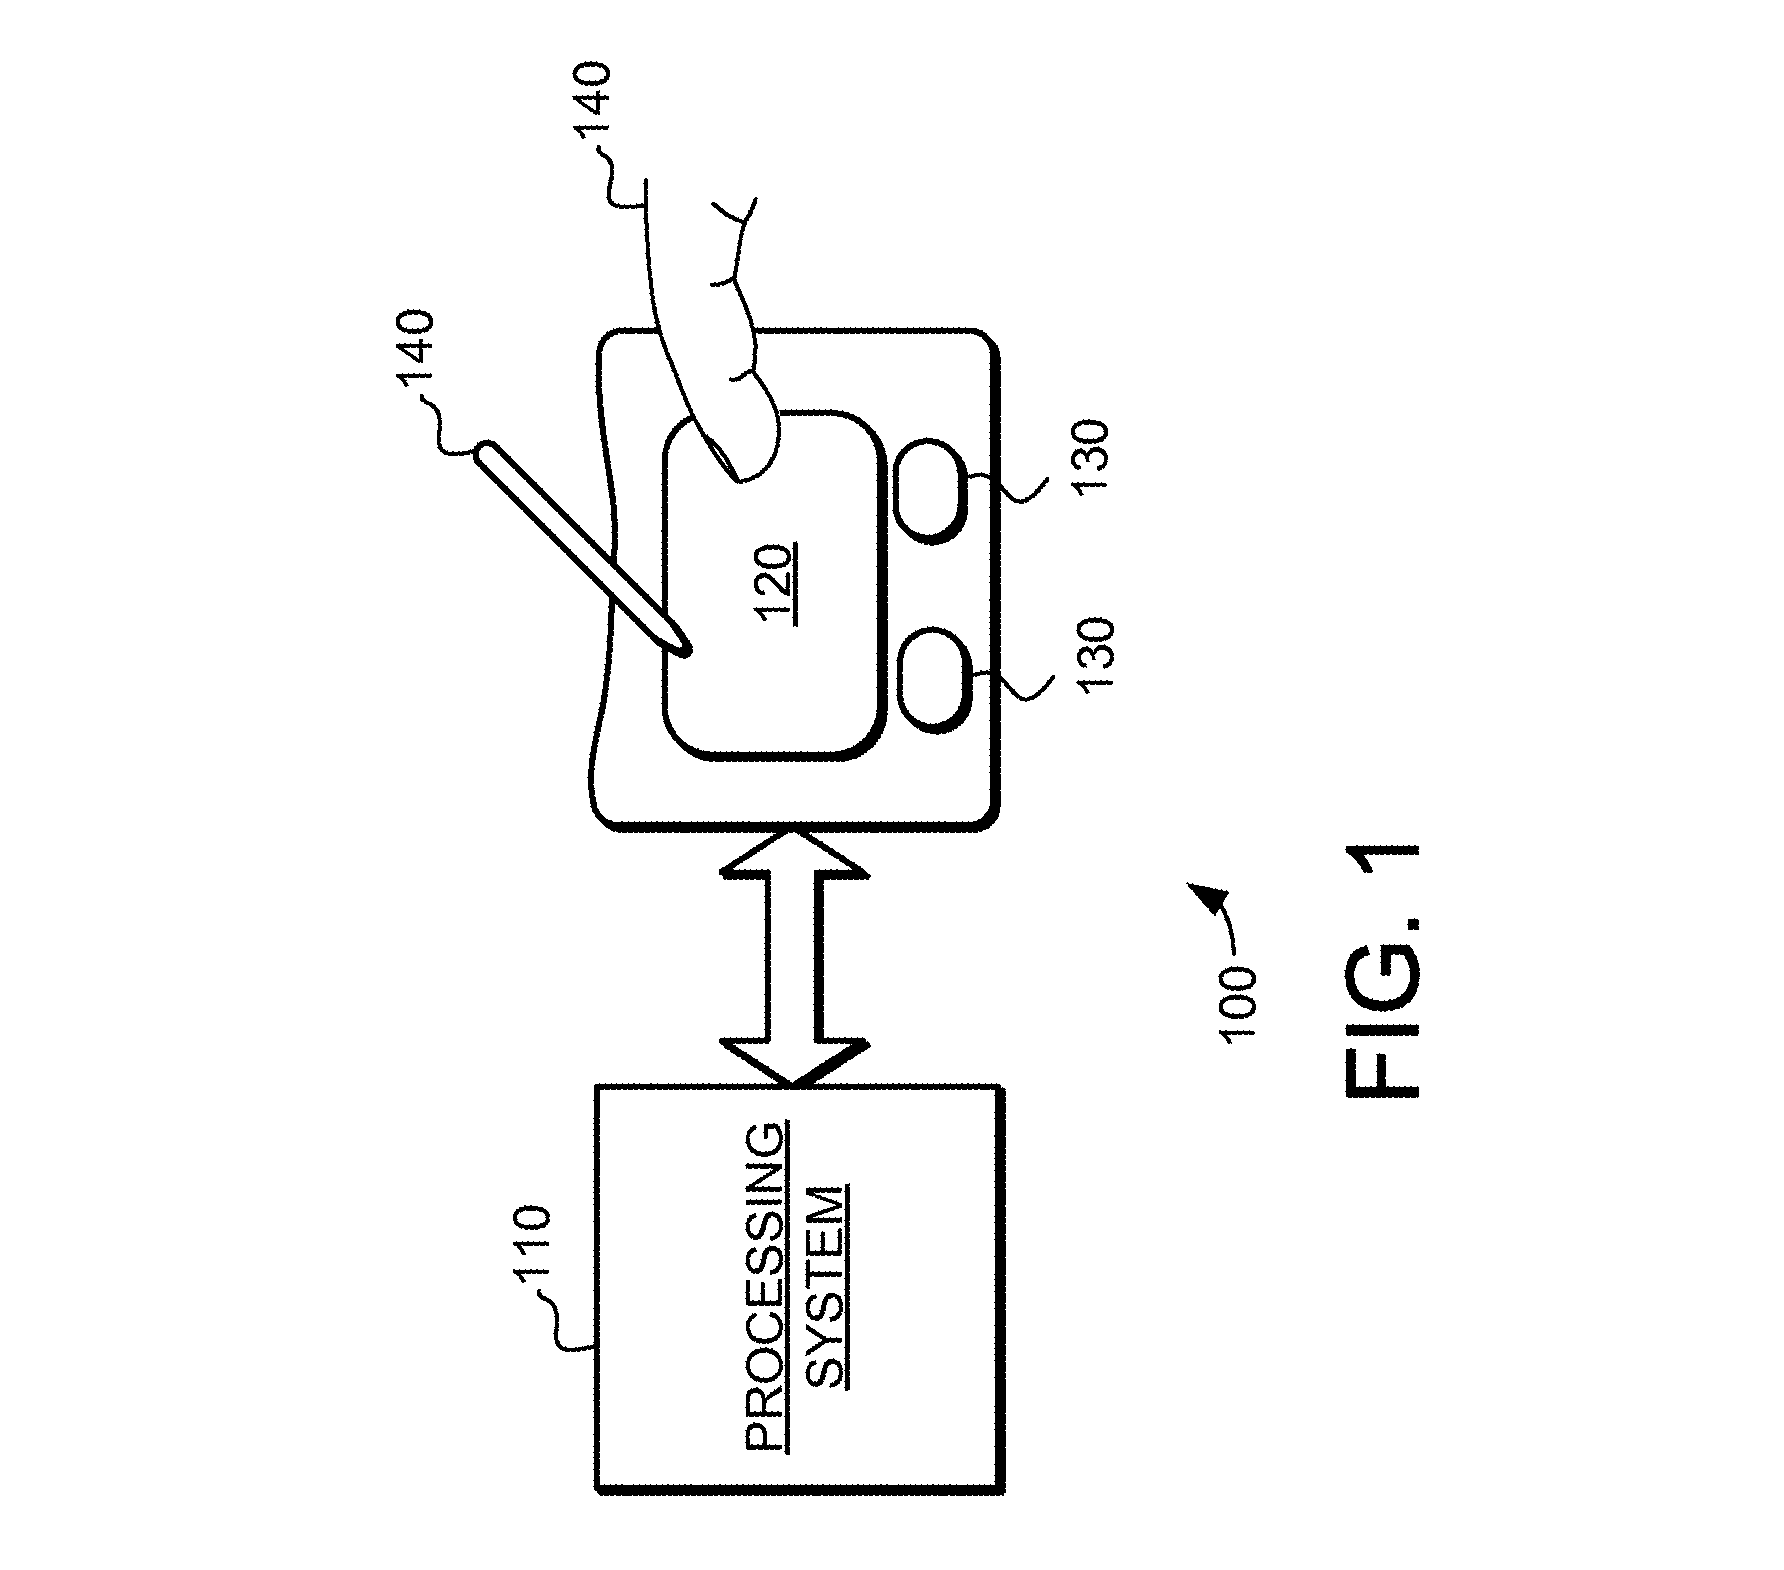 System and method for determining object information using an estimated rigid motion response